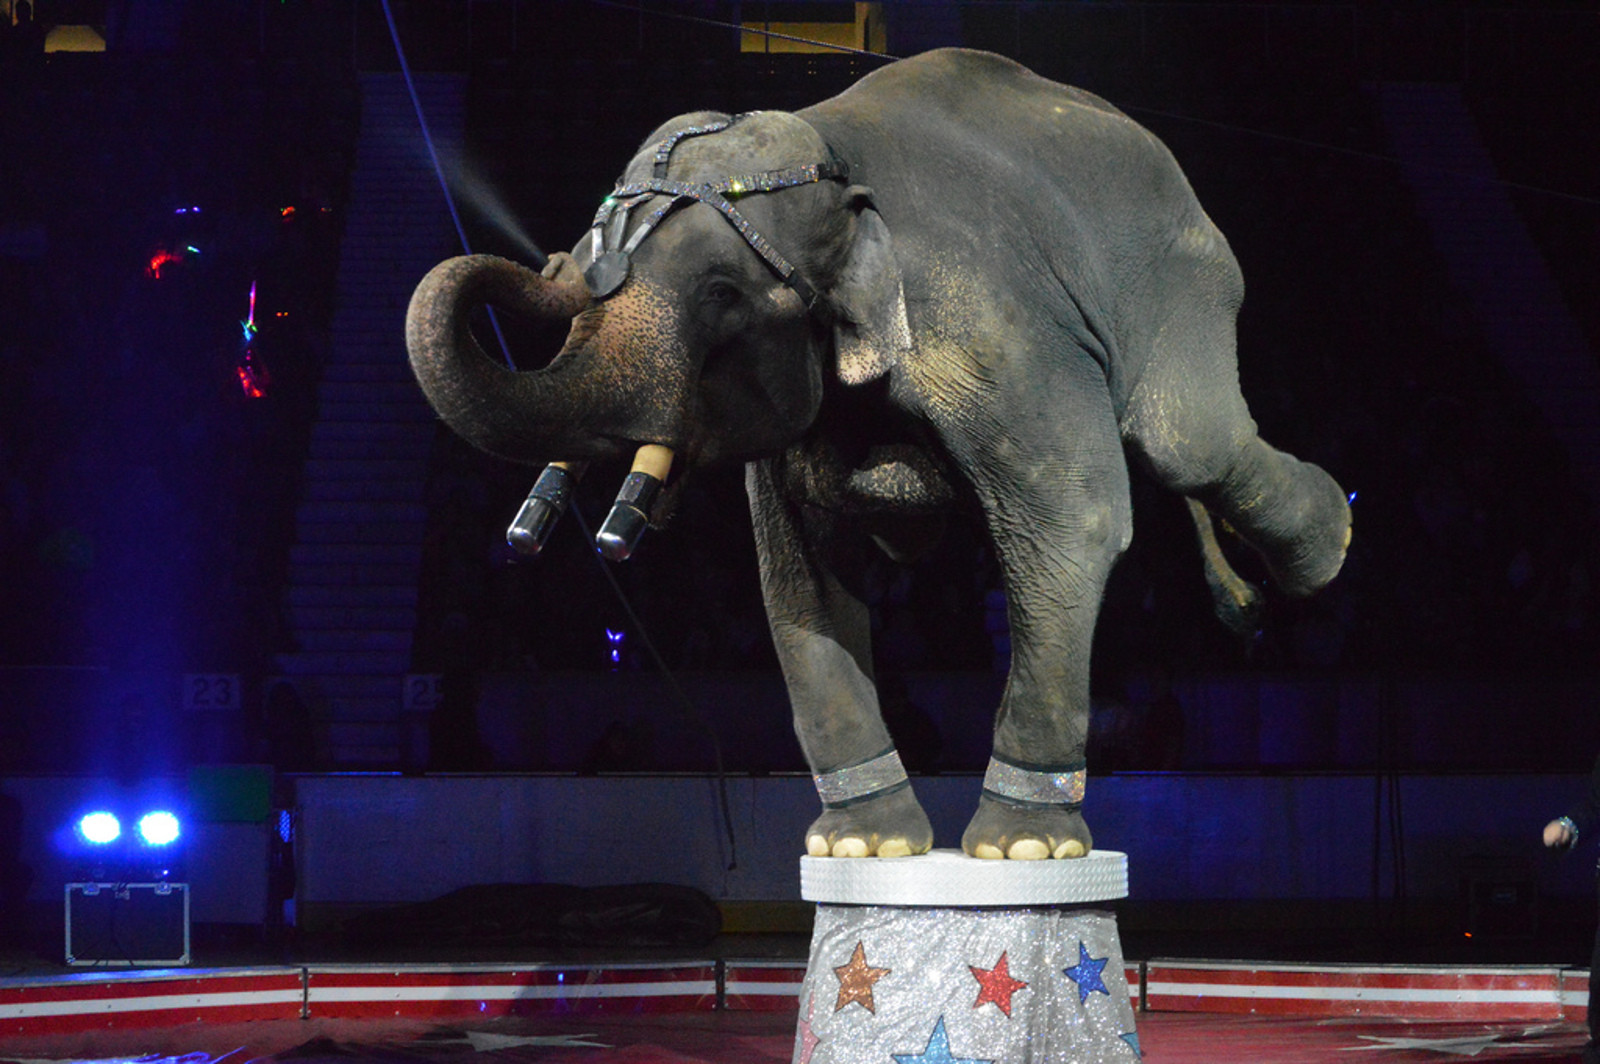 6 Amazing US Cities That Have Taken a Stand Against Circus Cruelty